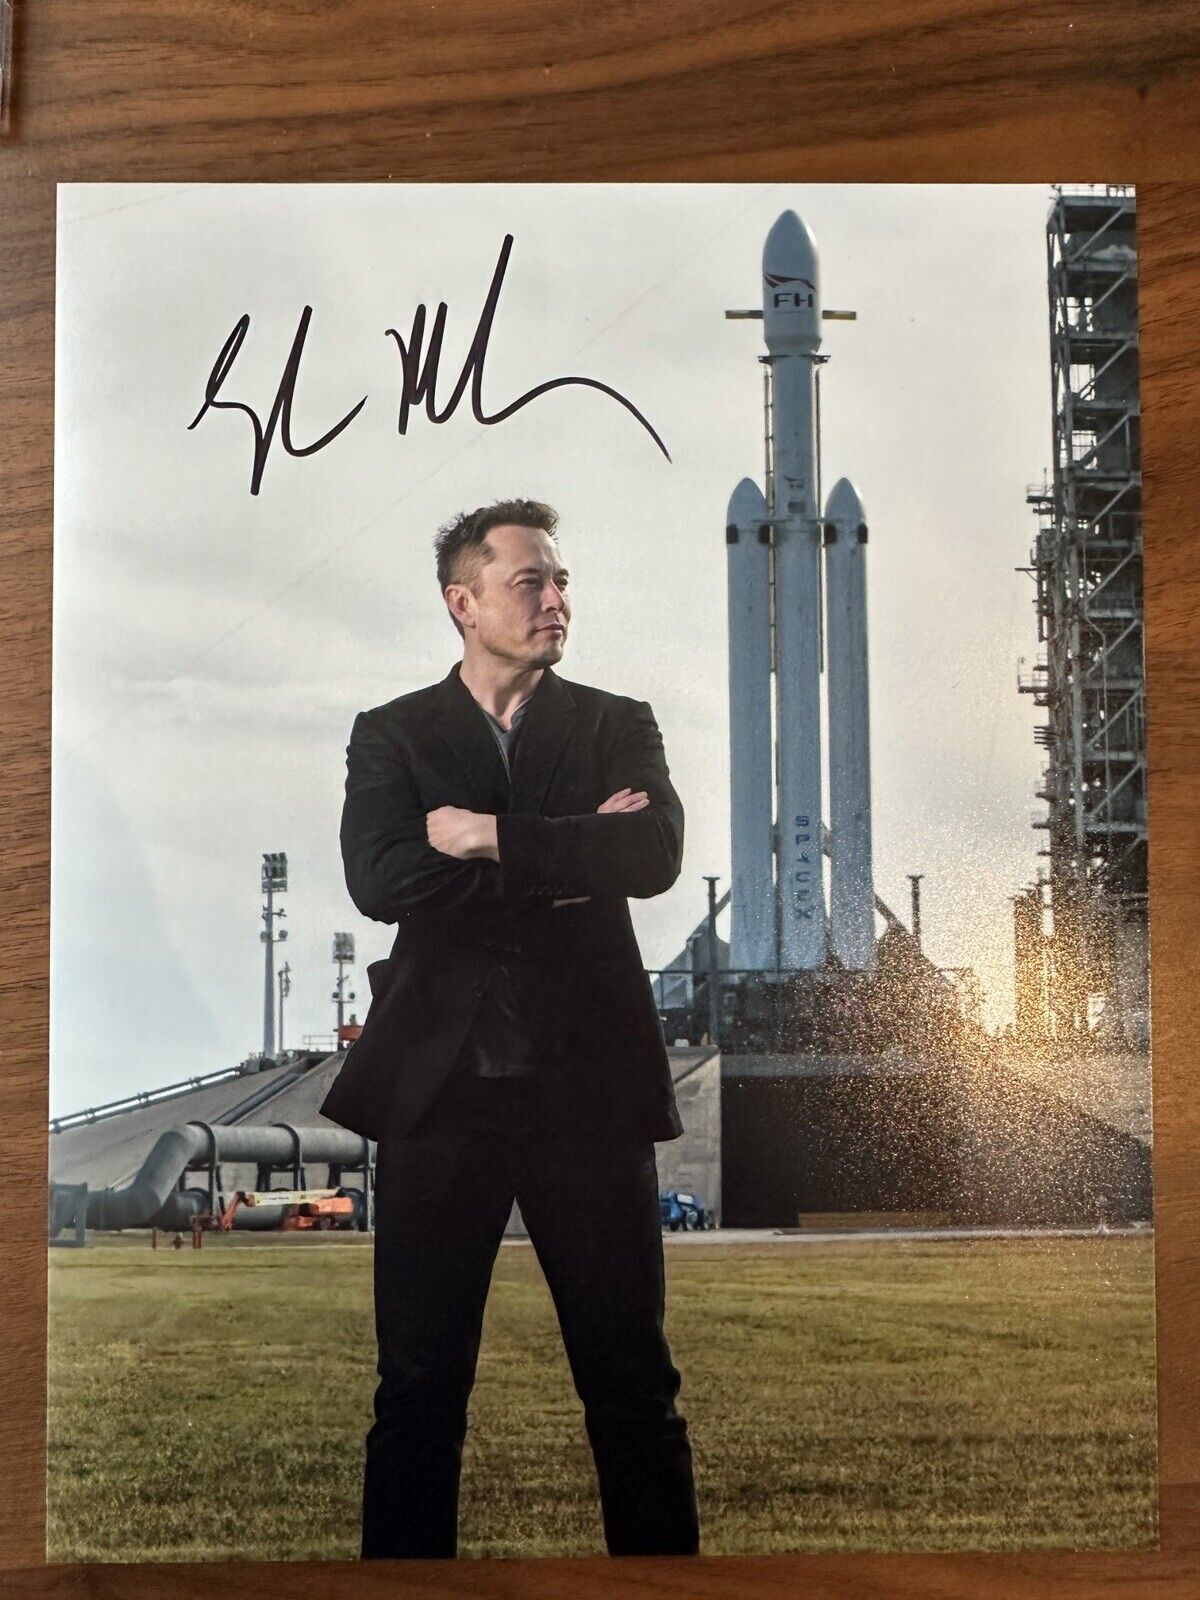 TESLA SpaceX FOUNDER CEO ELON MUSK Autographed 8x10 PHOTO With COA